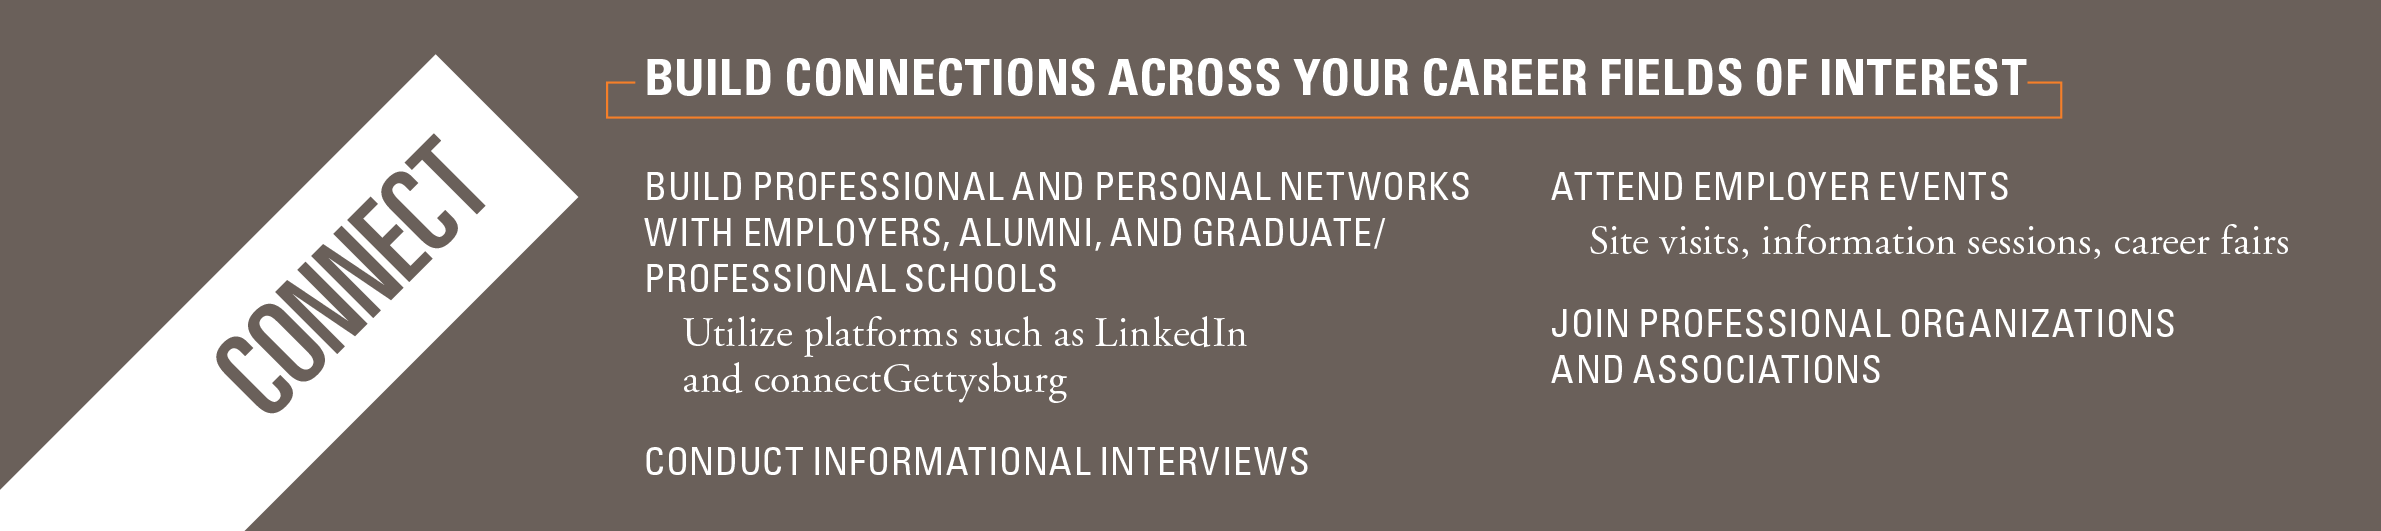 Connect: build connections across your career fields of interest